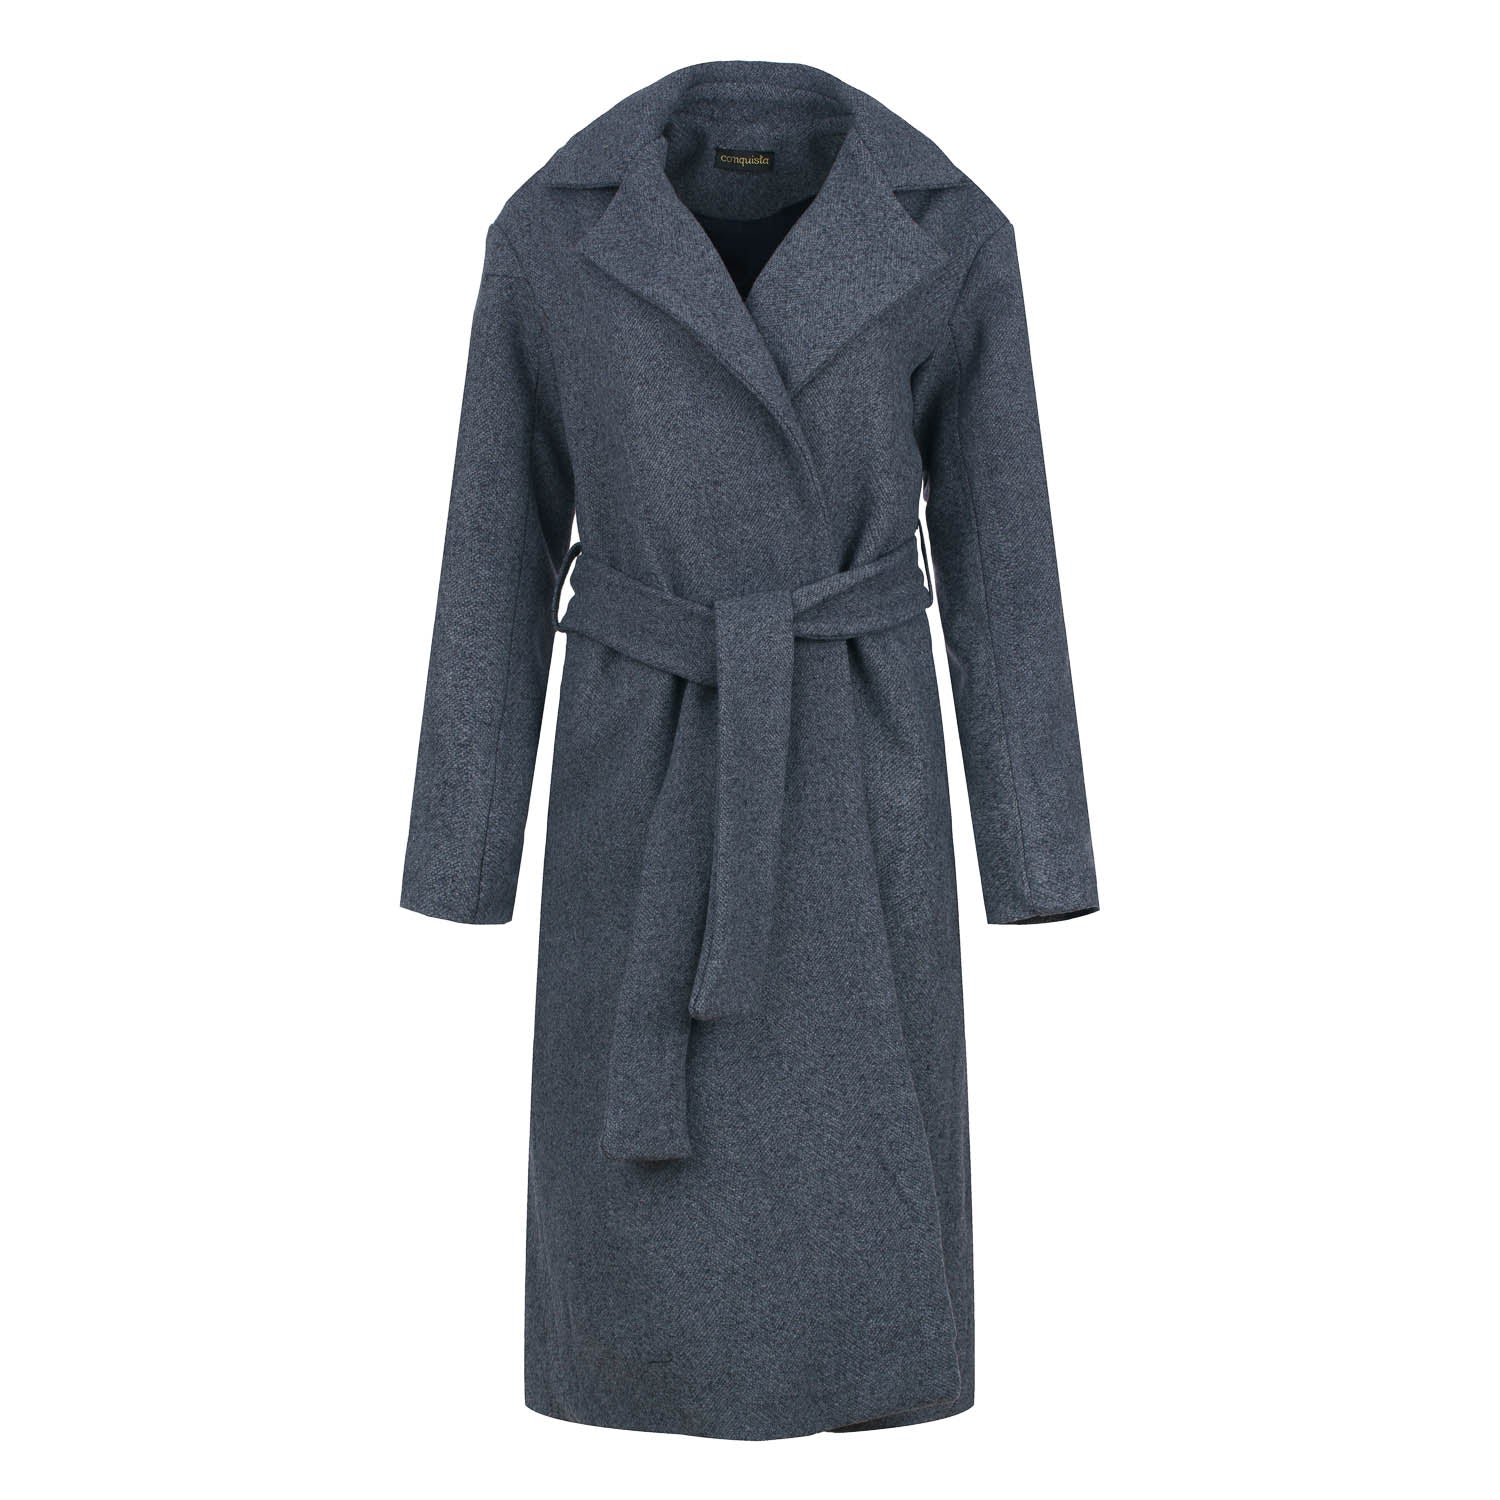 Conquista Women's Grey Charcoal Wool-cotton Blend Coat With Shawl Collar & Elegant Belt In Gray